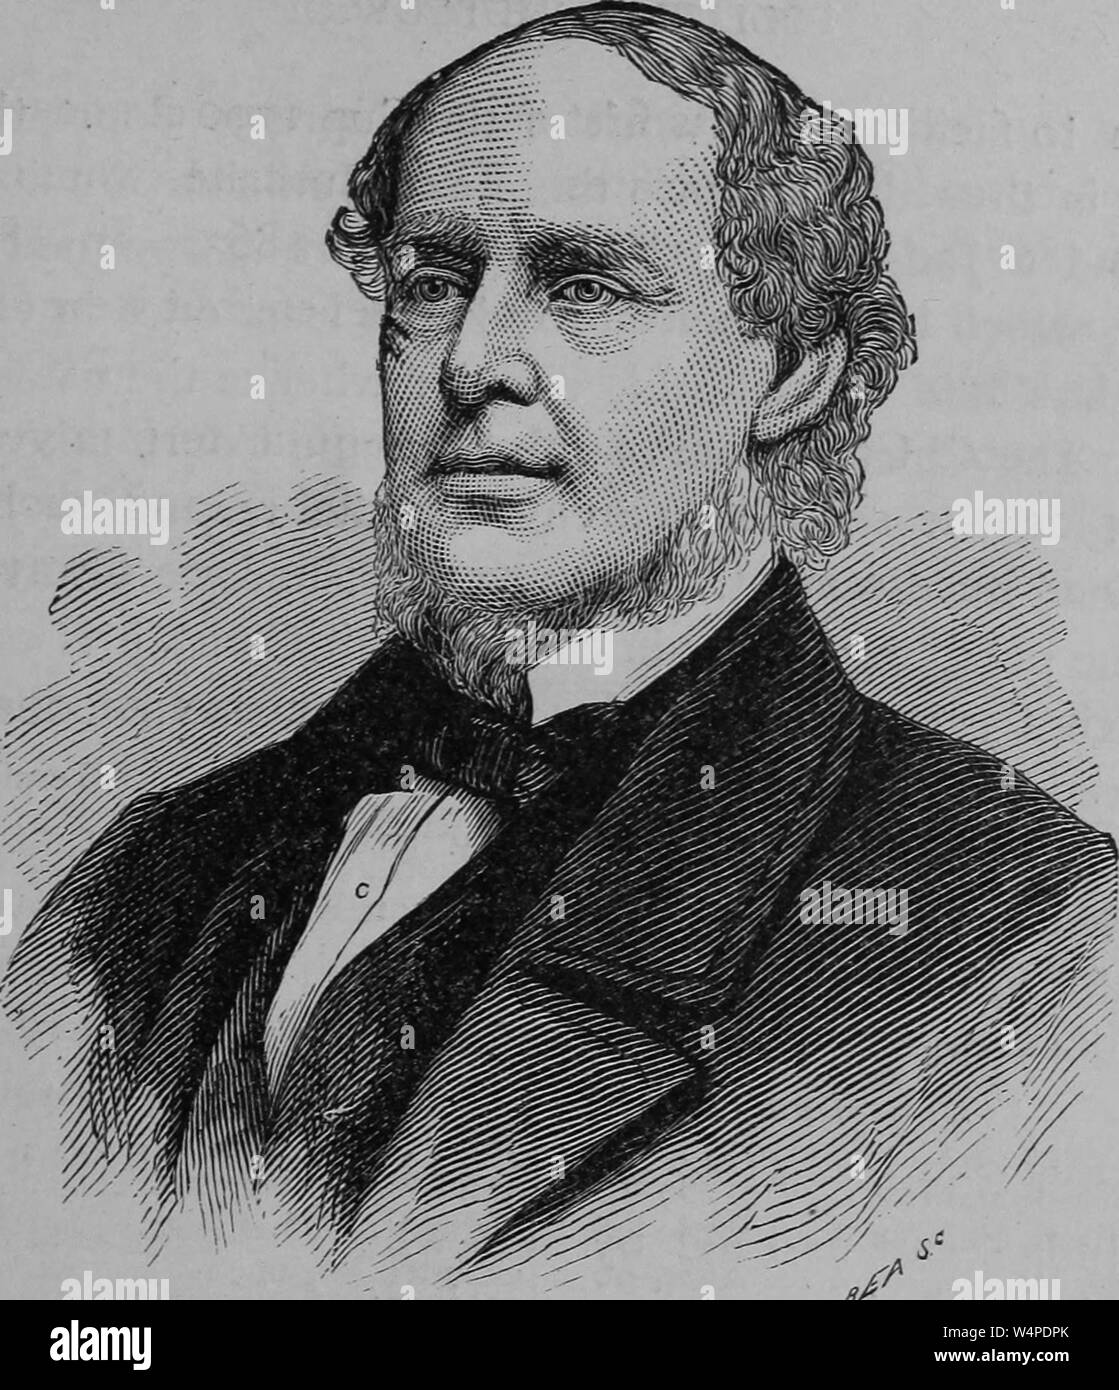 Engraved portrait of Salmon Portland Chase, the sixth Chief Justice of the United States, from the book 'The political history of the United States' by James Penny Boyd, 1888. Courtesy Internet Archive. () Stock Photo